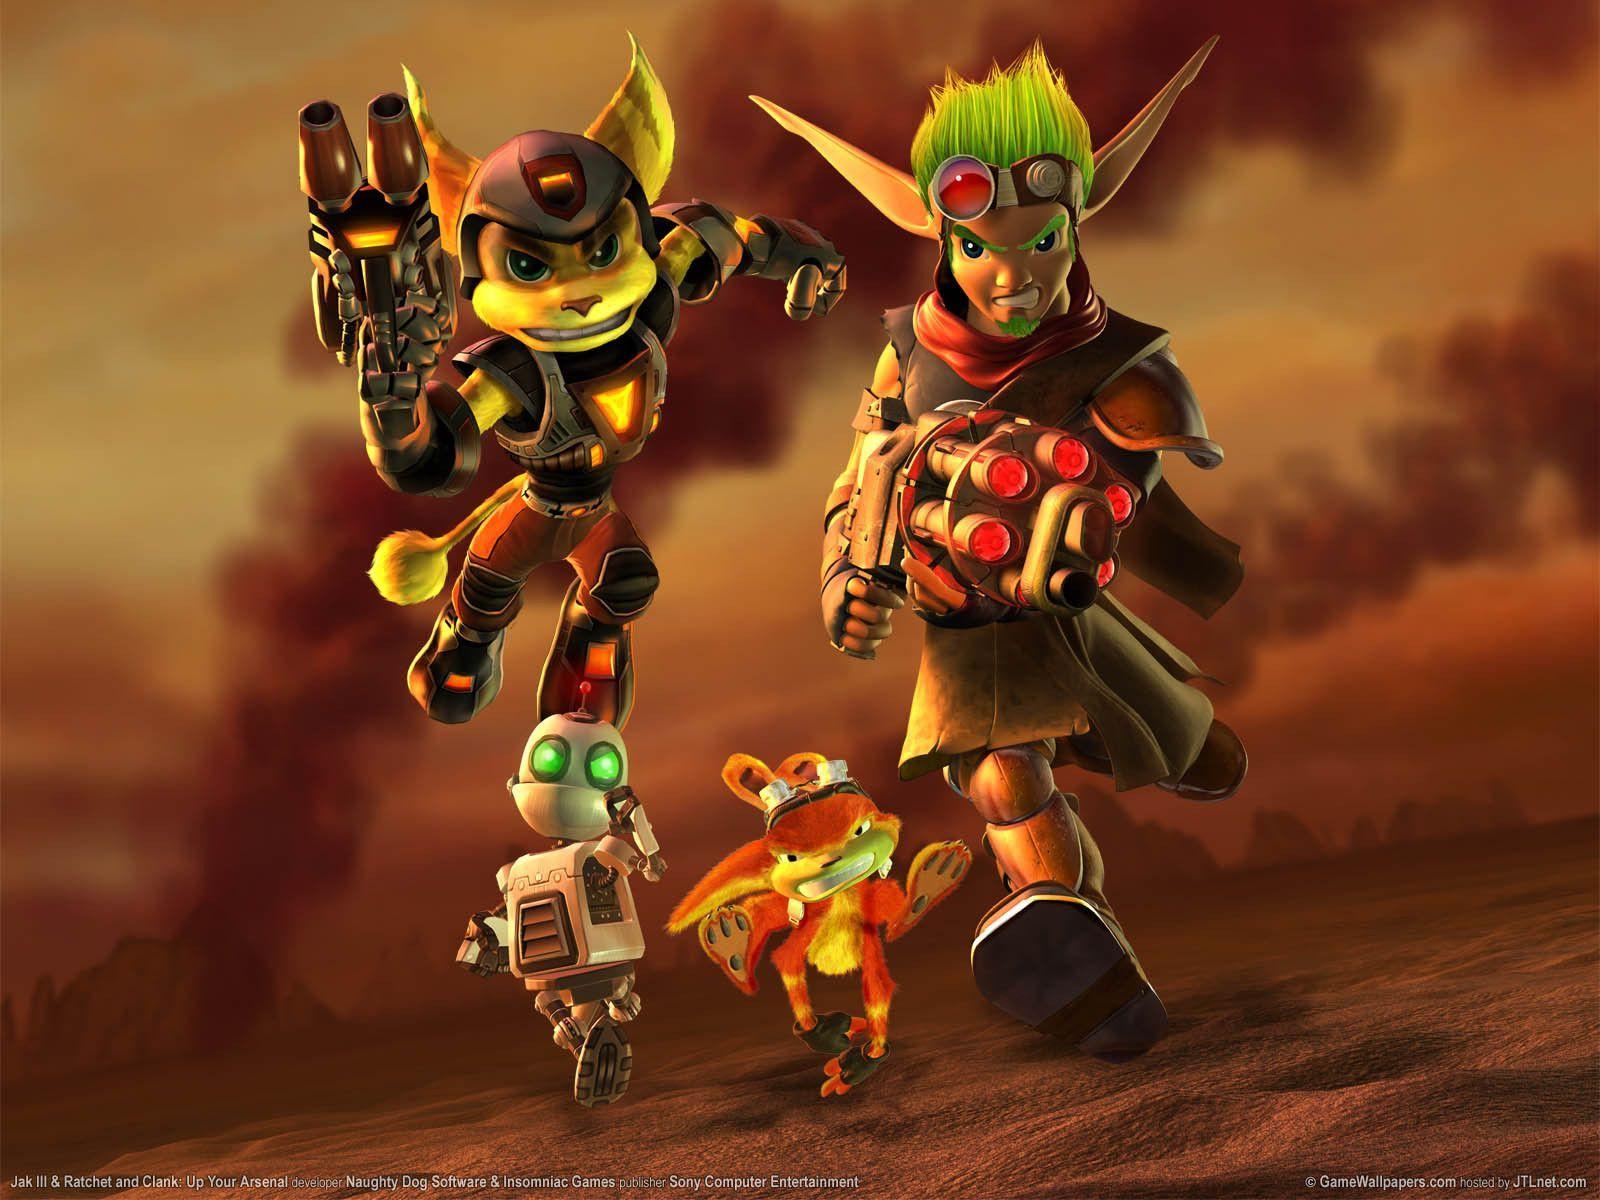 1600x1200 funkyrach01 Hình nền: Jak and Daxter - Ratchet and Clank, 2020